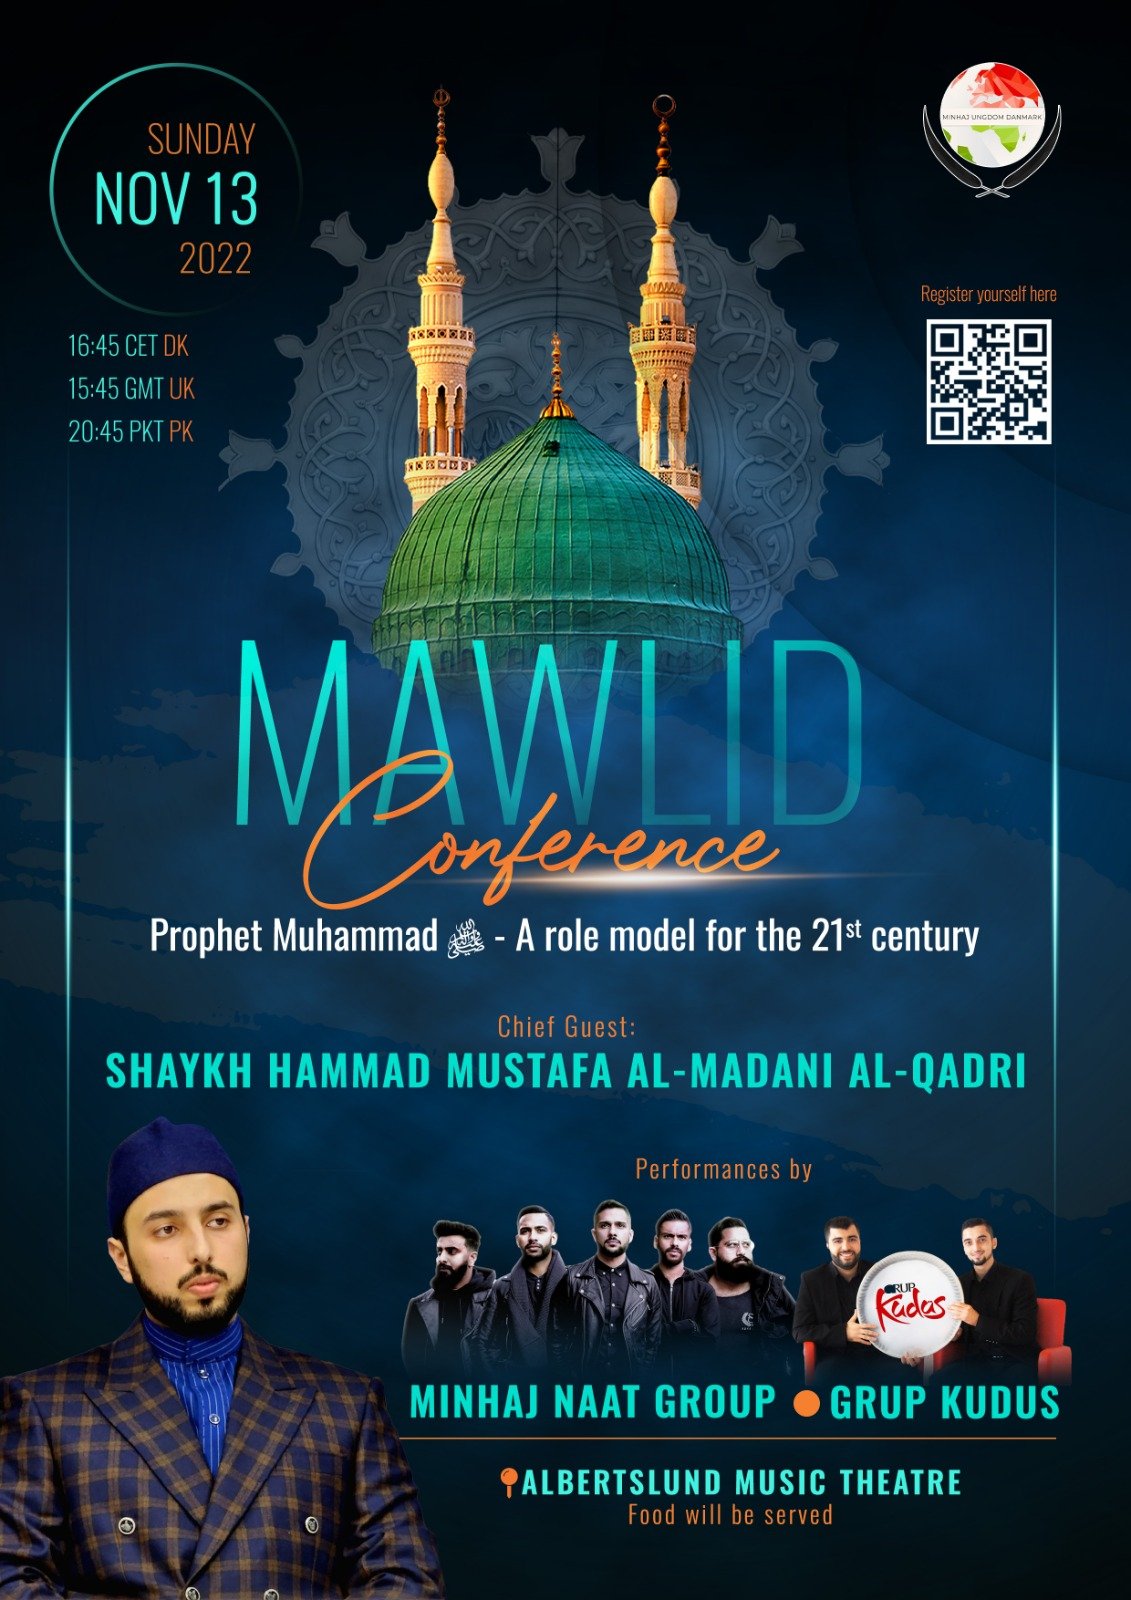 Mawlid Conference - Prophet Muhammad - A role model for the 21st century